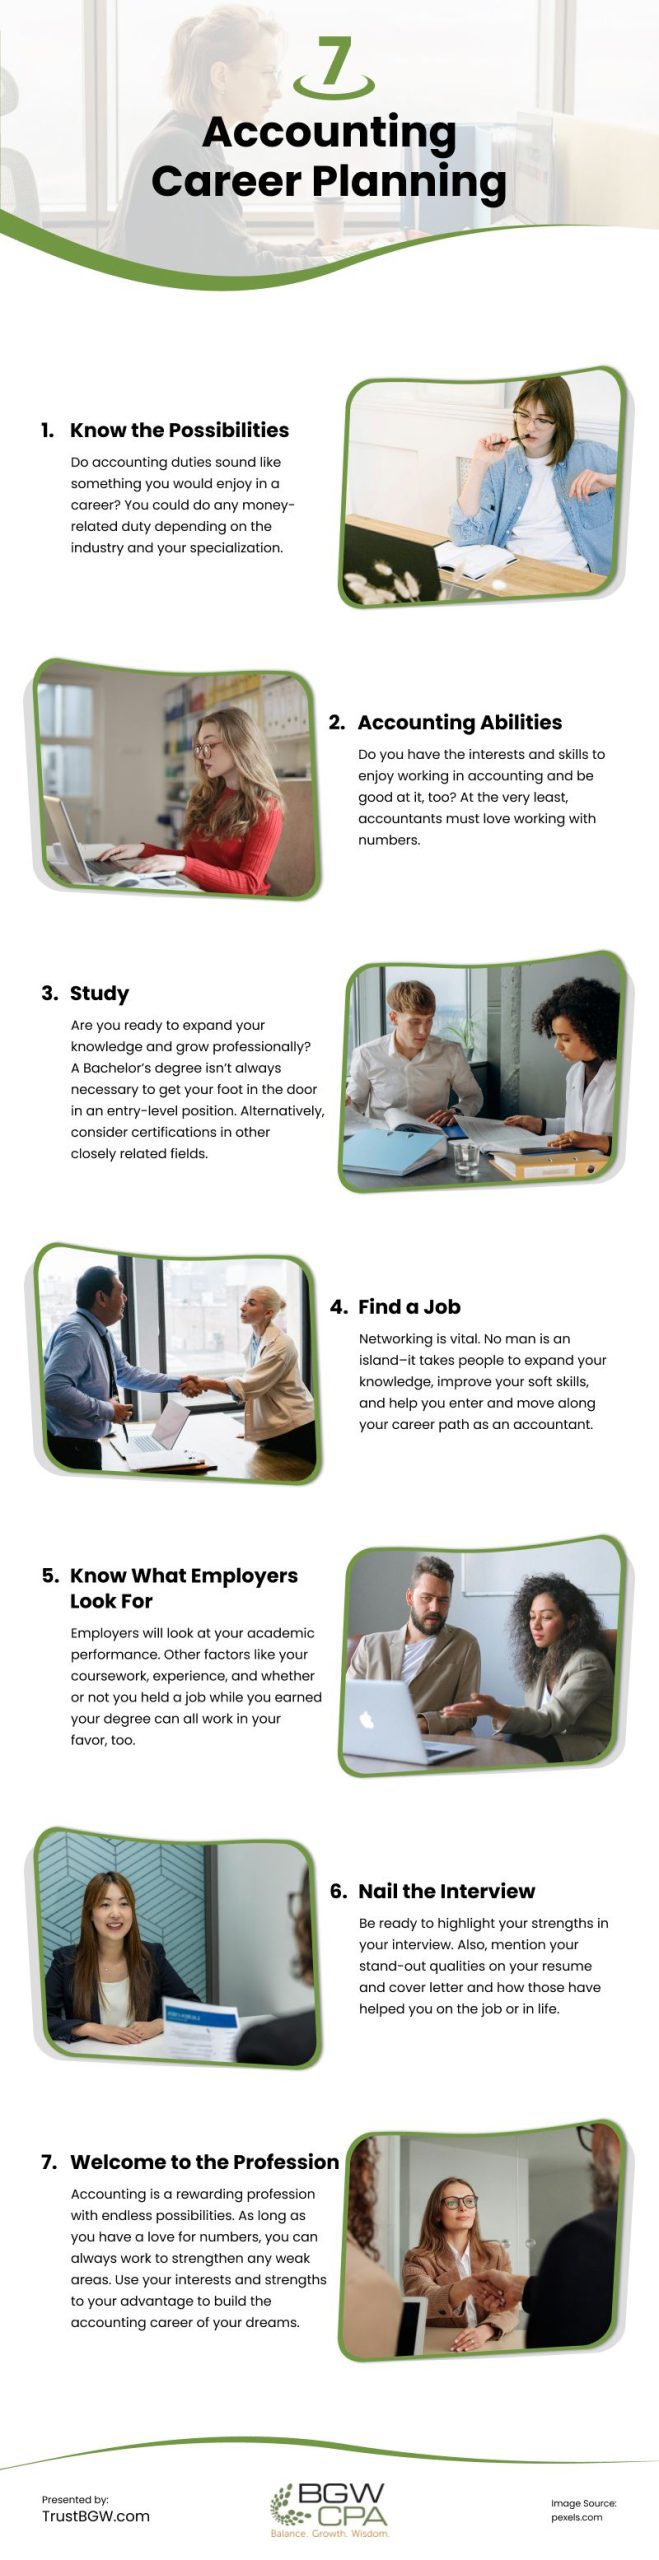 7 Accounting Career Planning Infographic